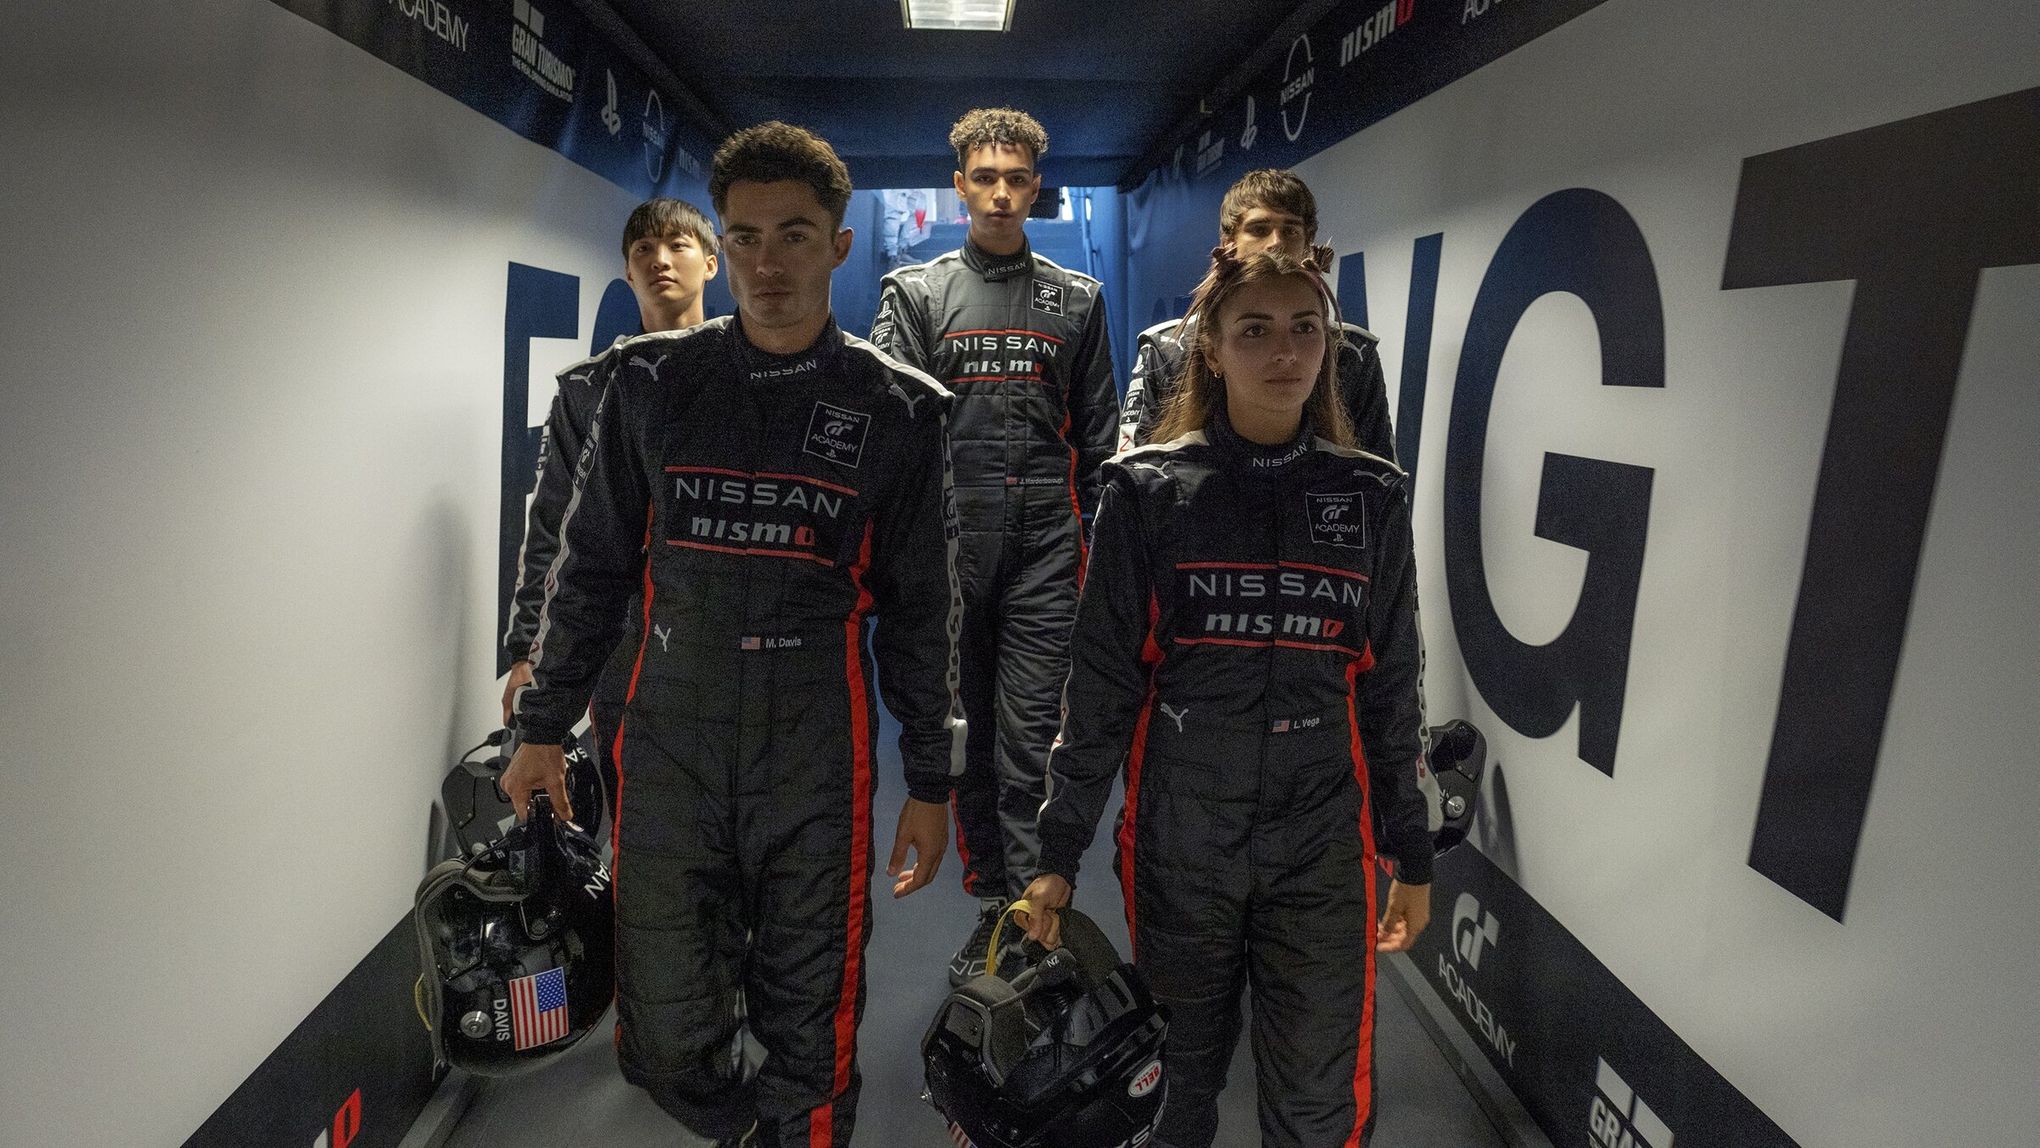 Gran Turismo' review: Tech and heart merge in lively video game adaptation